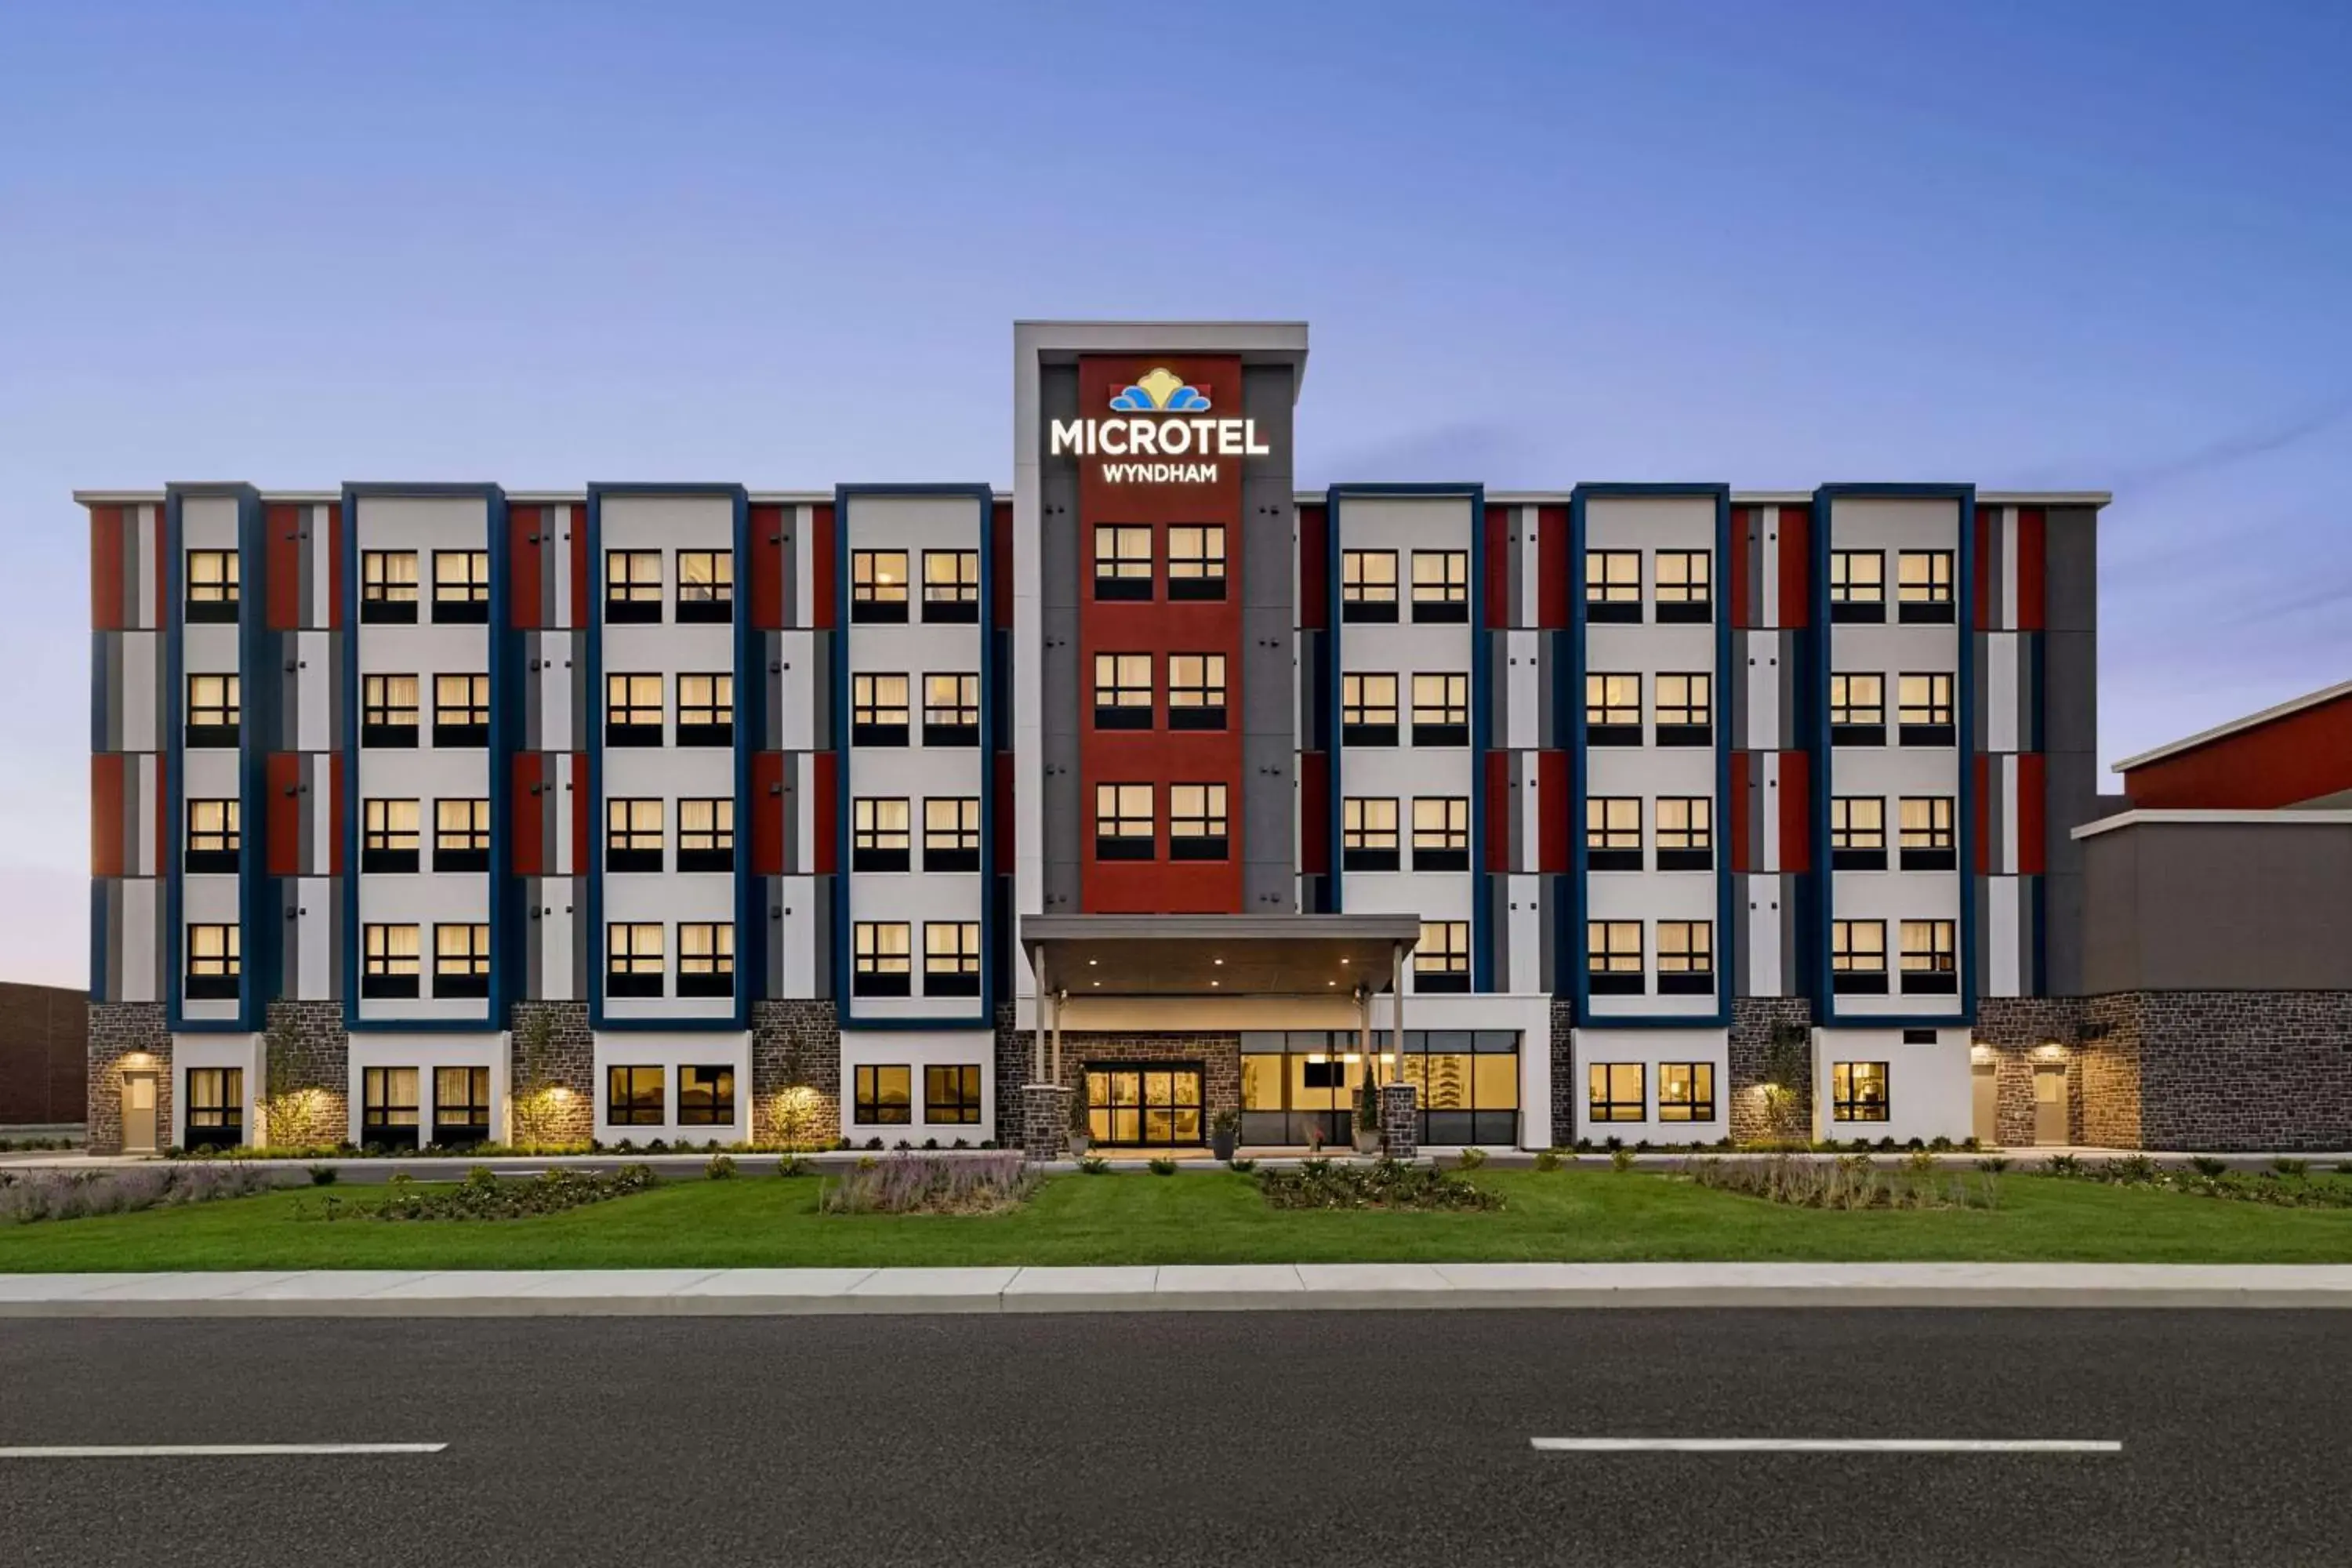 Property Building in Microtel Inn & Suites Montreal Airport-Dorval QC